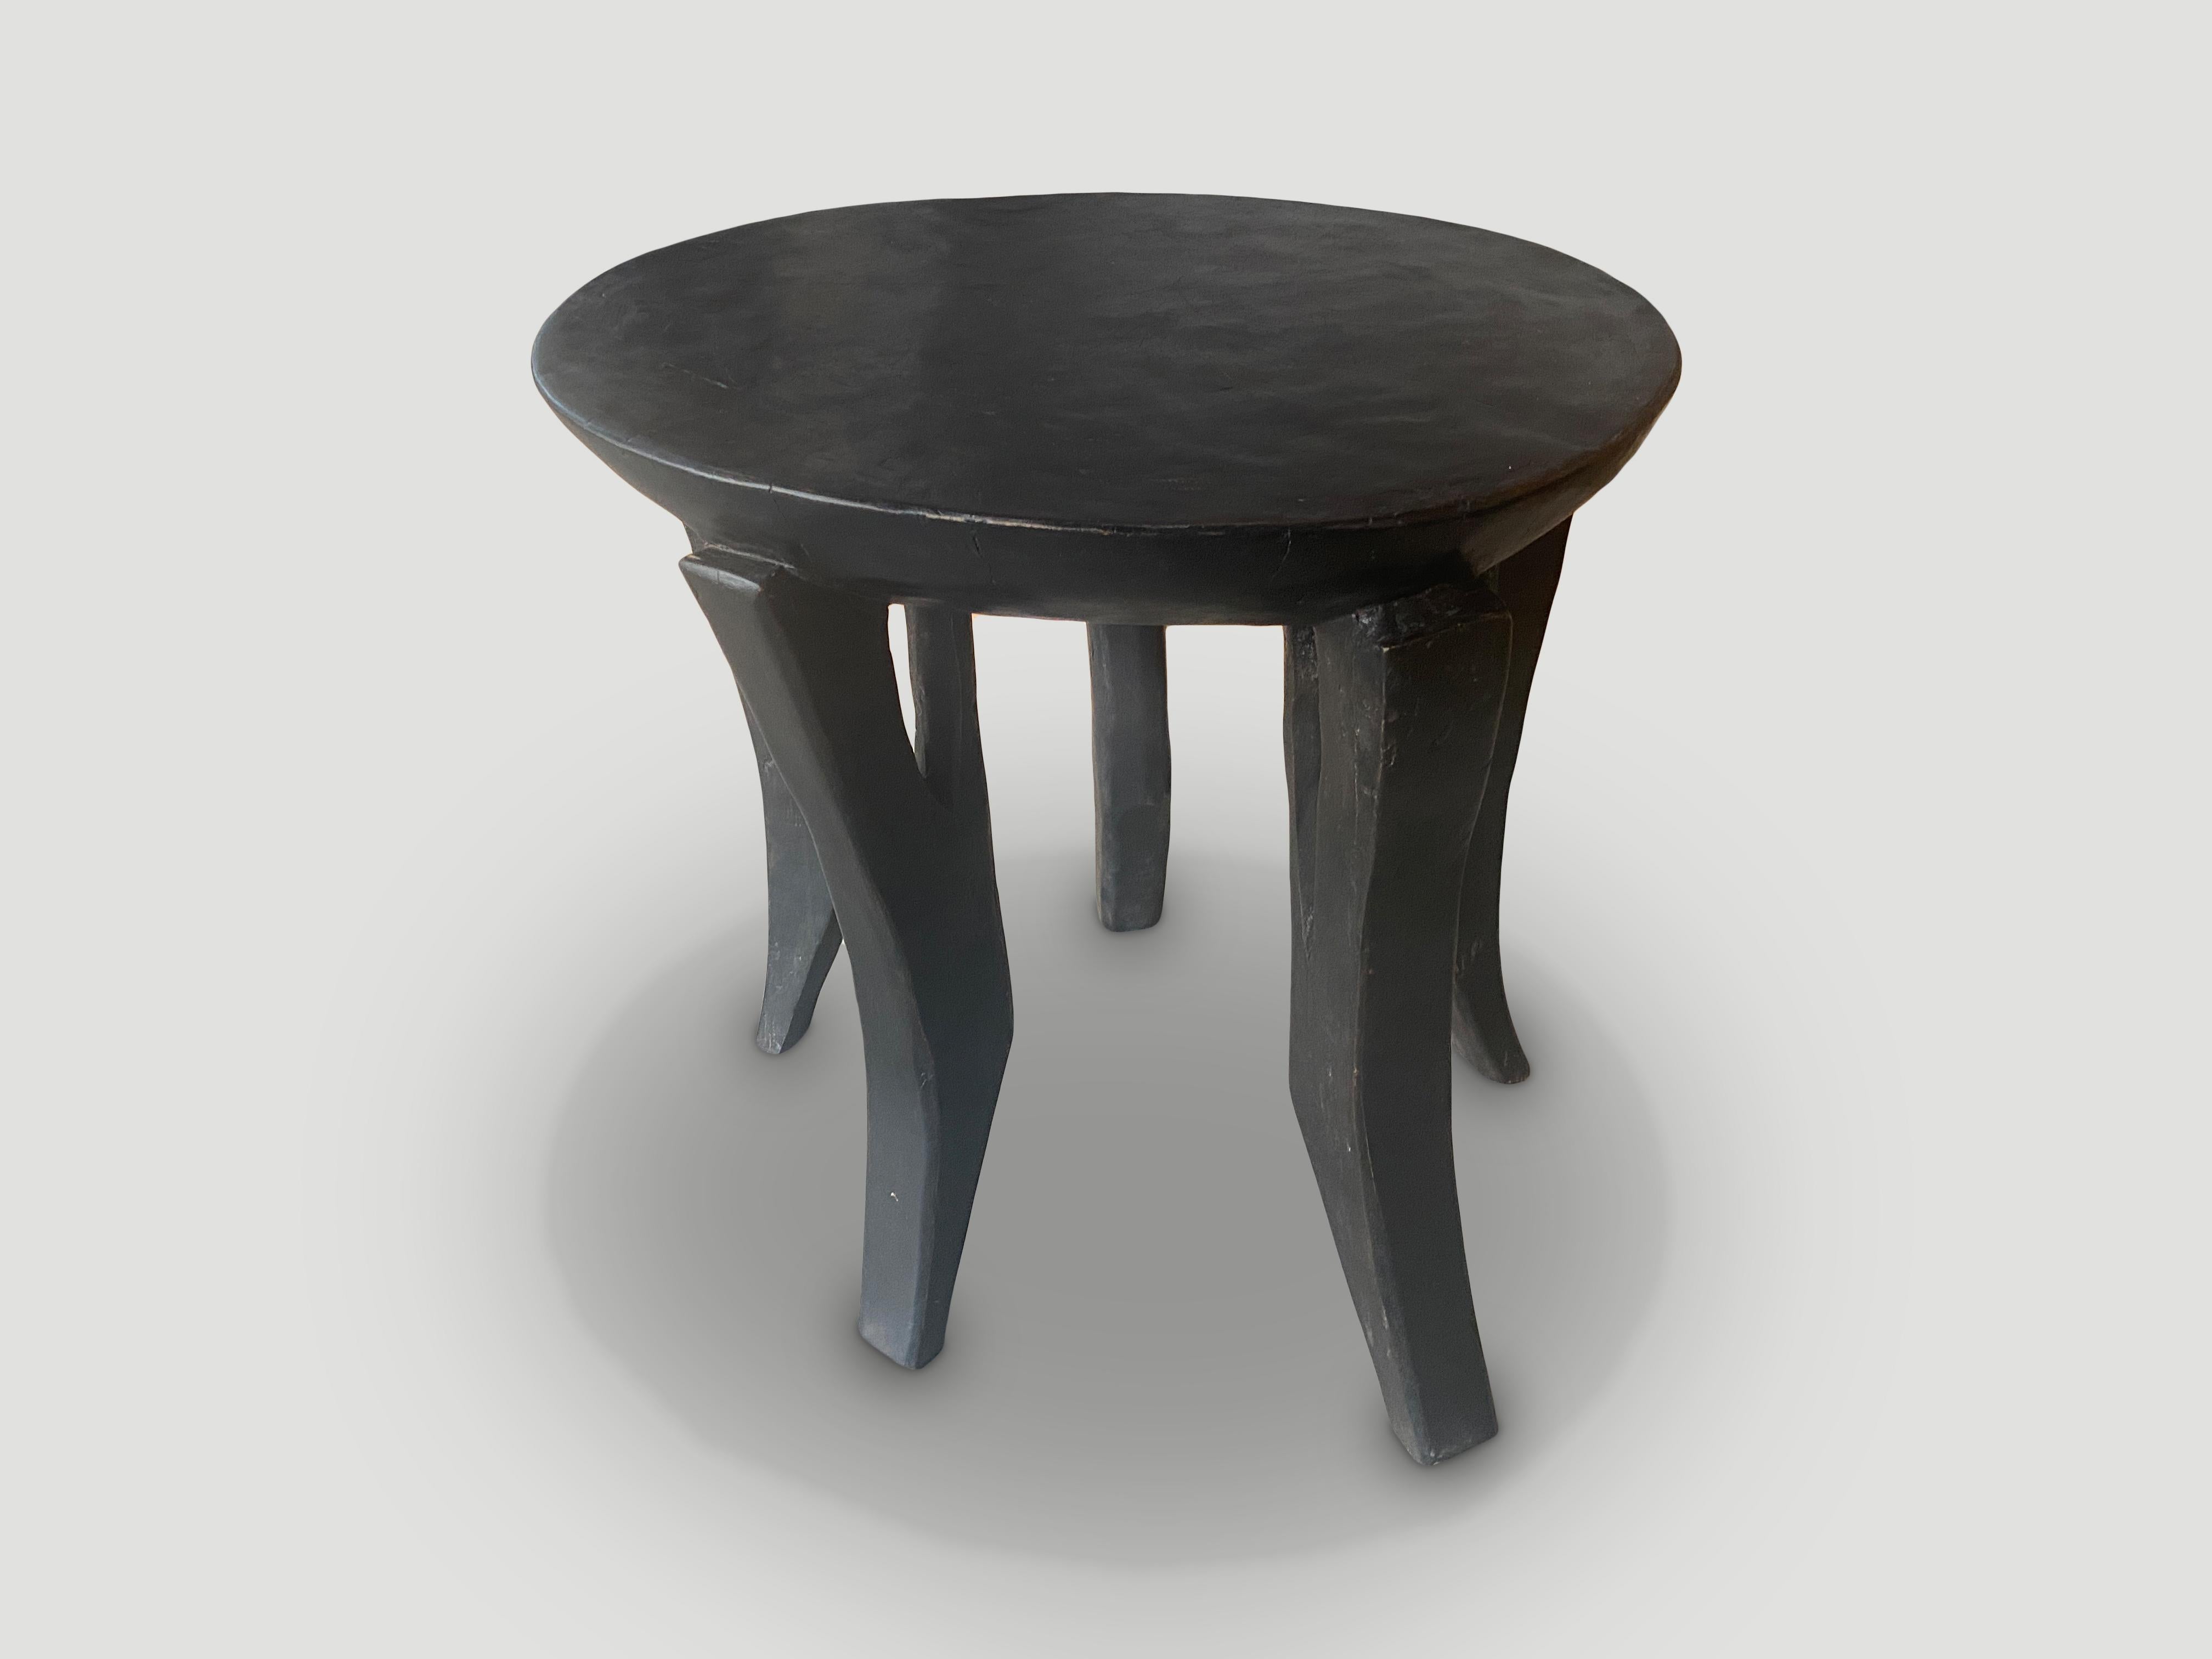 Impressive antique African mahogany side table hand carved from a single piece of mahogany wood with a four inch bevelled top. A beautiful versatile item that is both sculptural and usable. We only source the best. 

This side table was sourced in